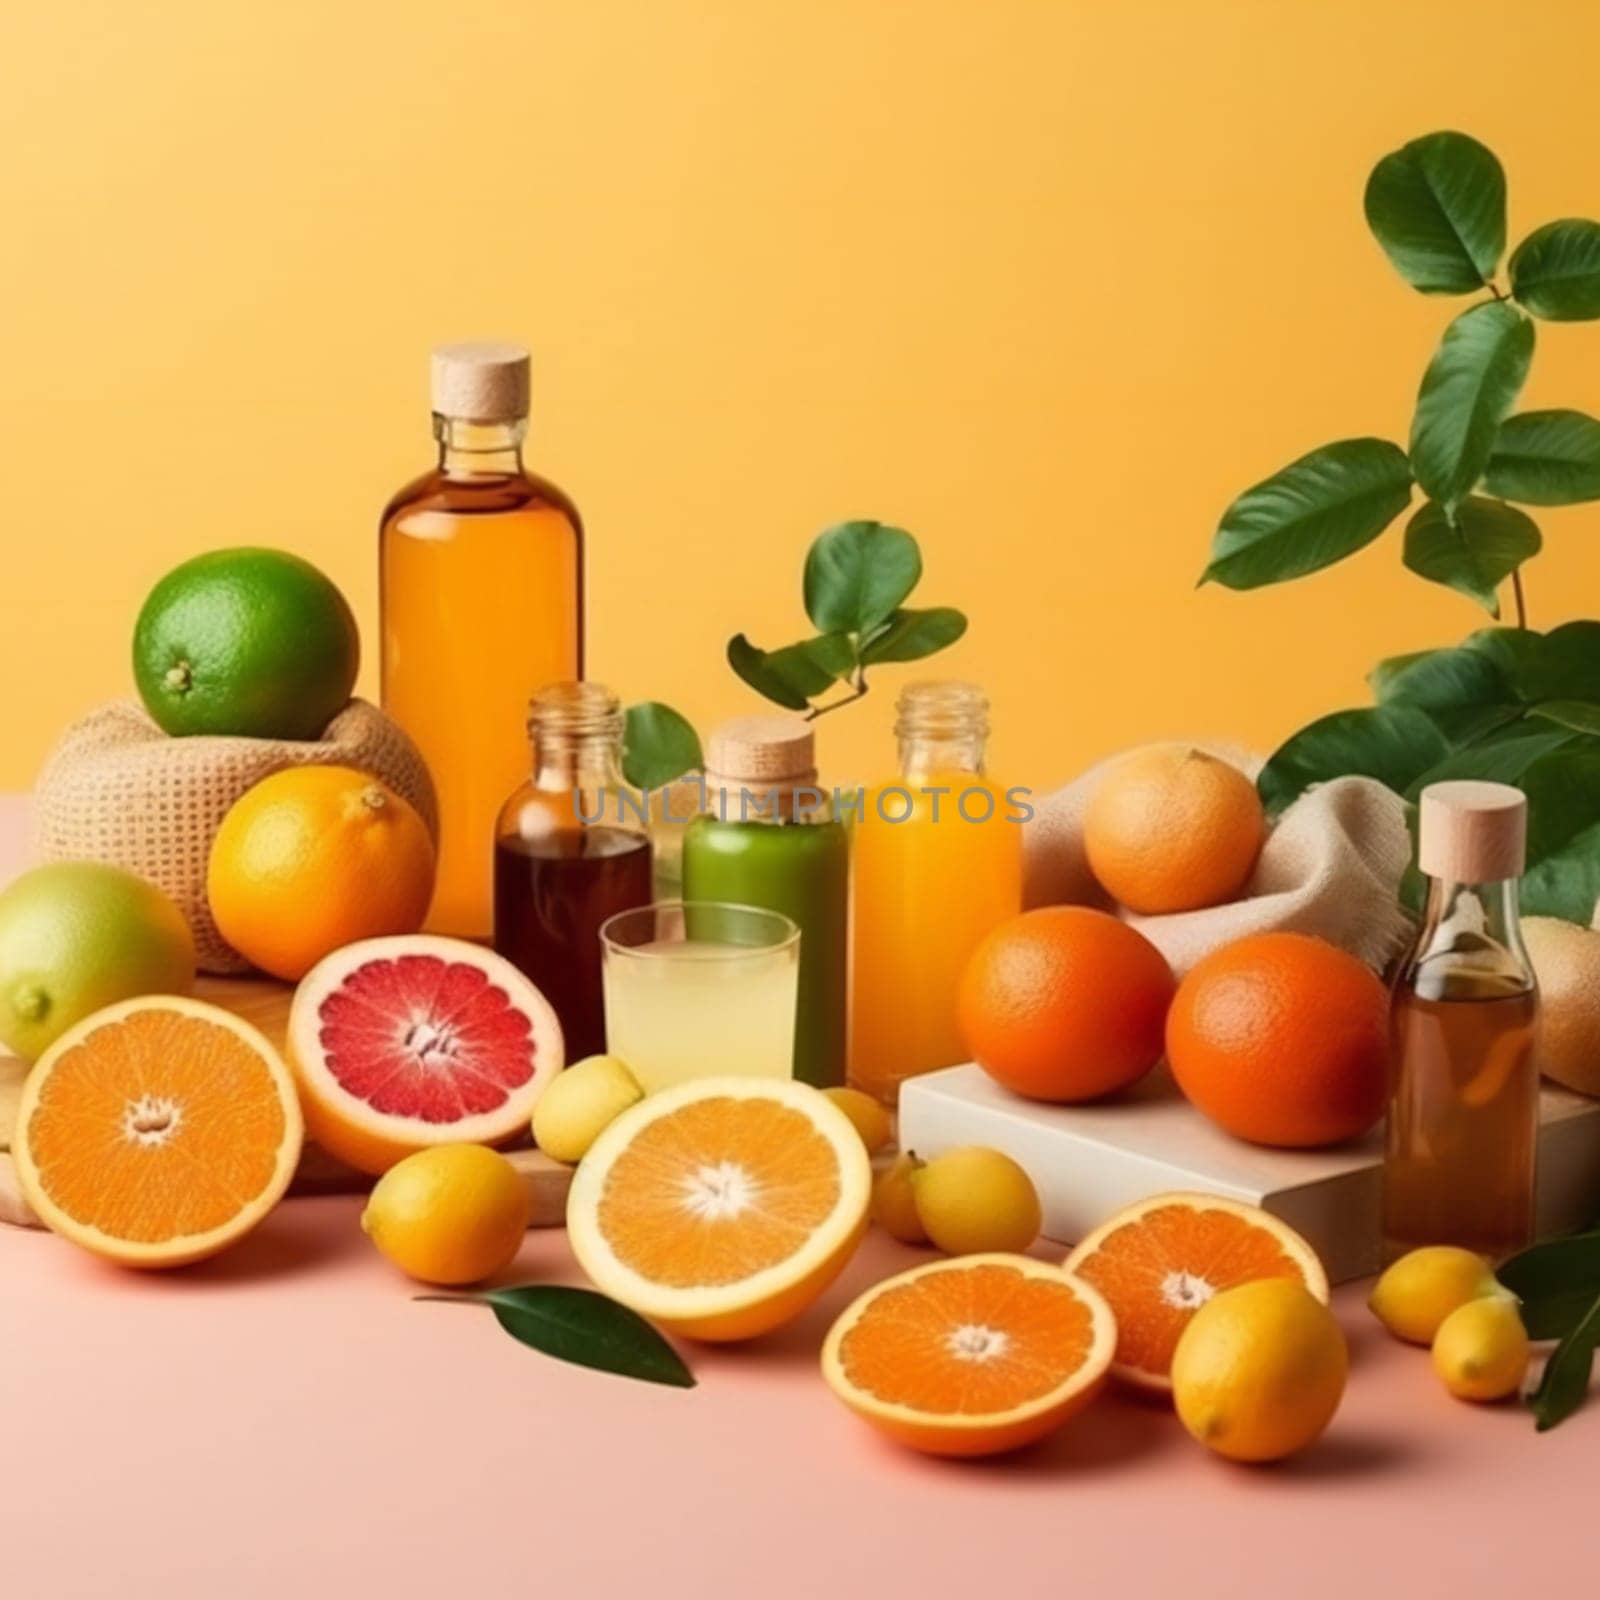 Vitamin C illustration. Foods containing ascorbic acid. Source of vitamin C, fruits and vegetables - fresh oranges, berries, greens isolated on bright background